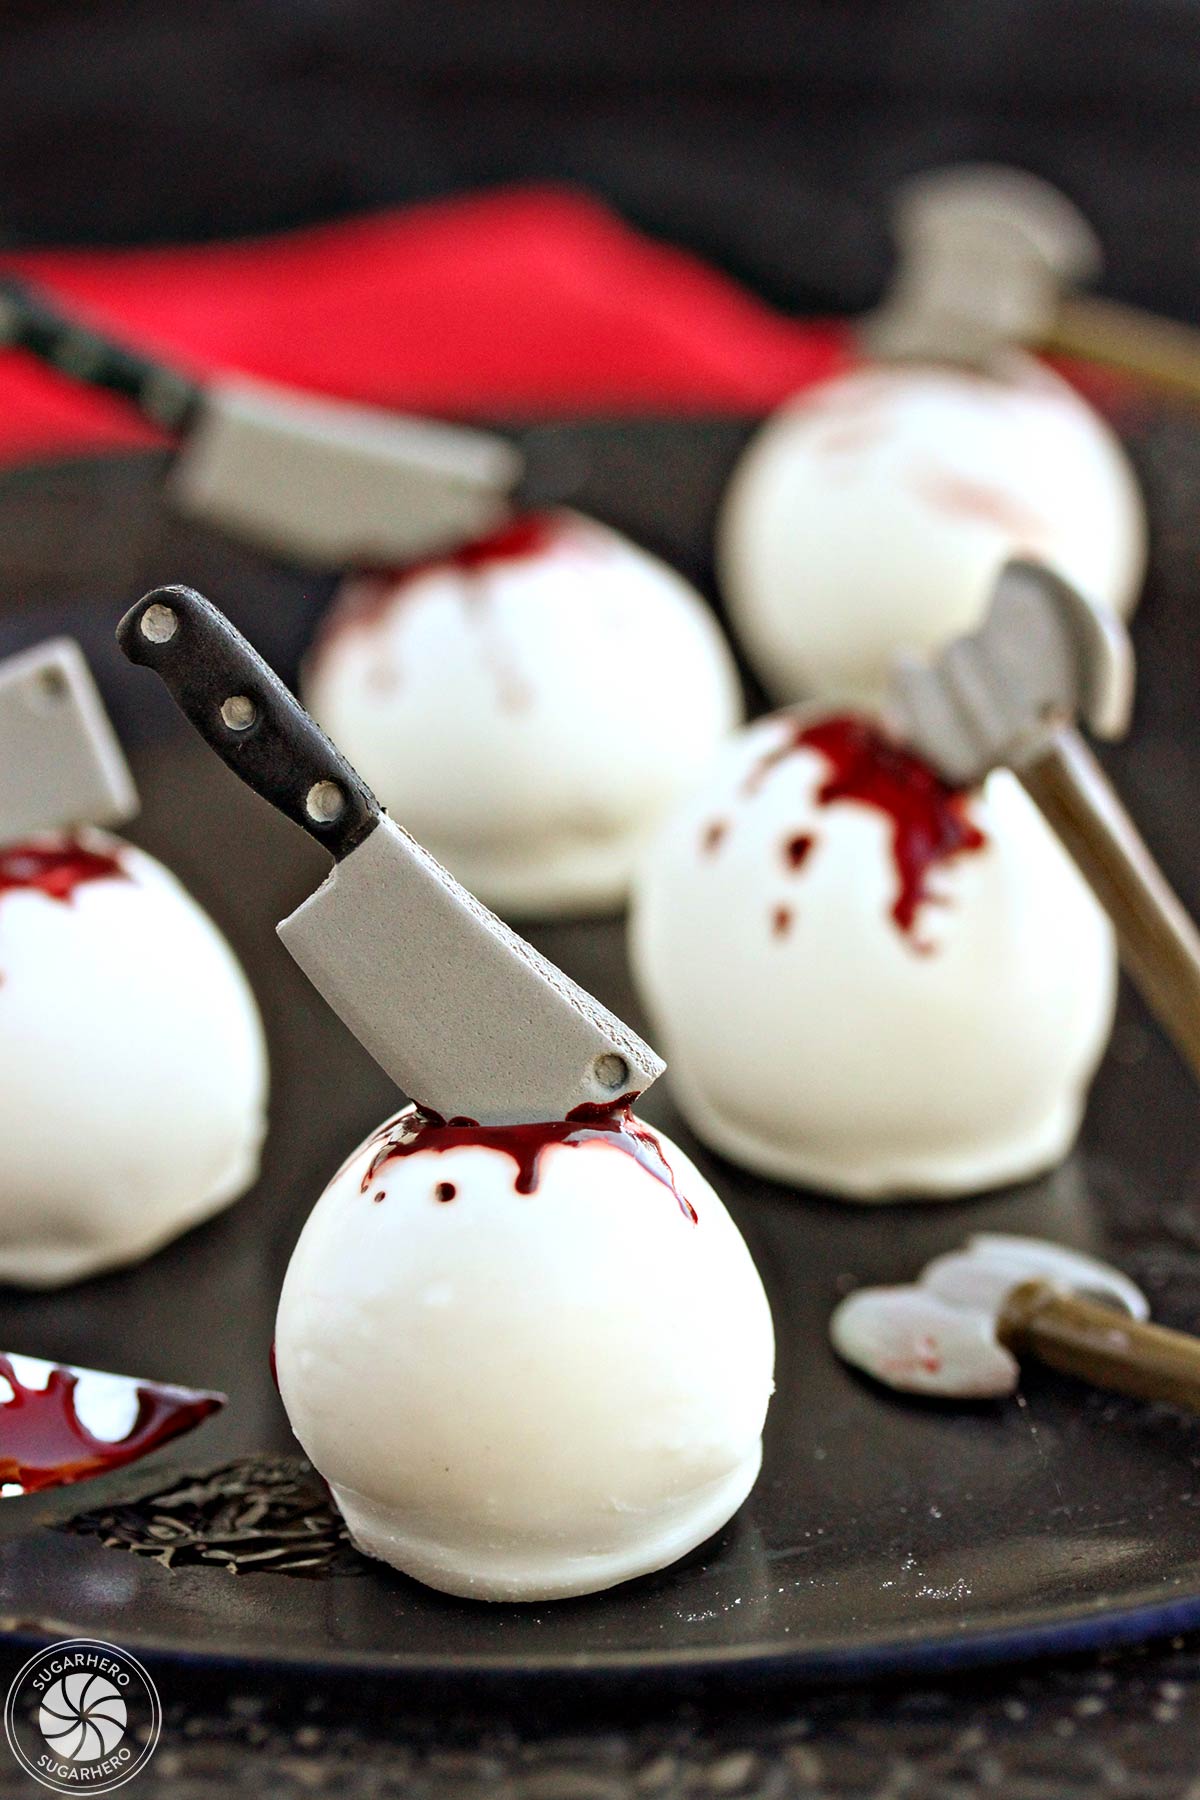 Five Bloody Halloween Cake Ball Truffles on a black plate with a red linen in the background.